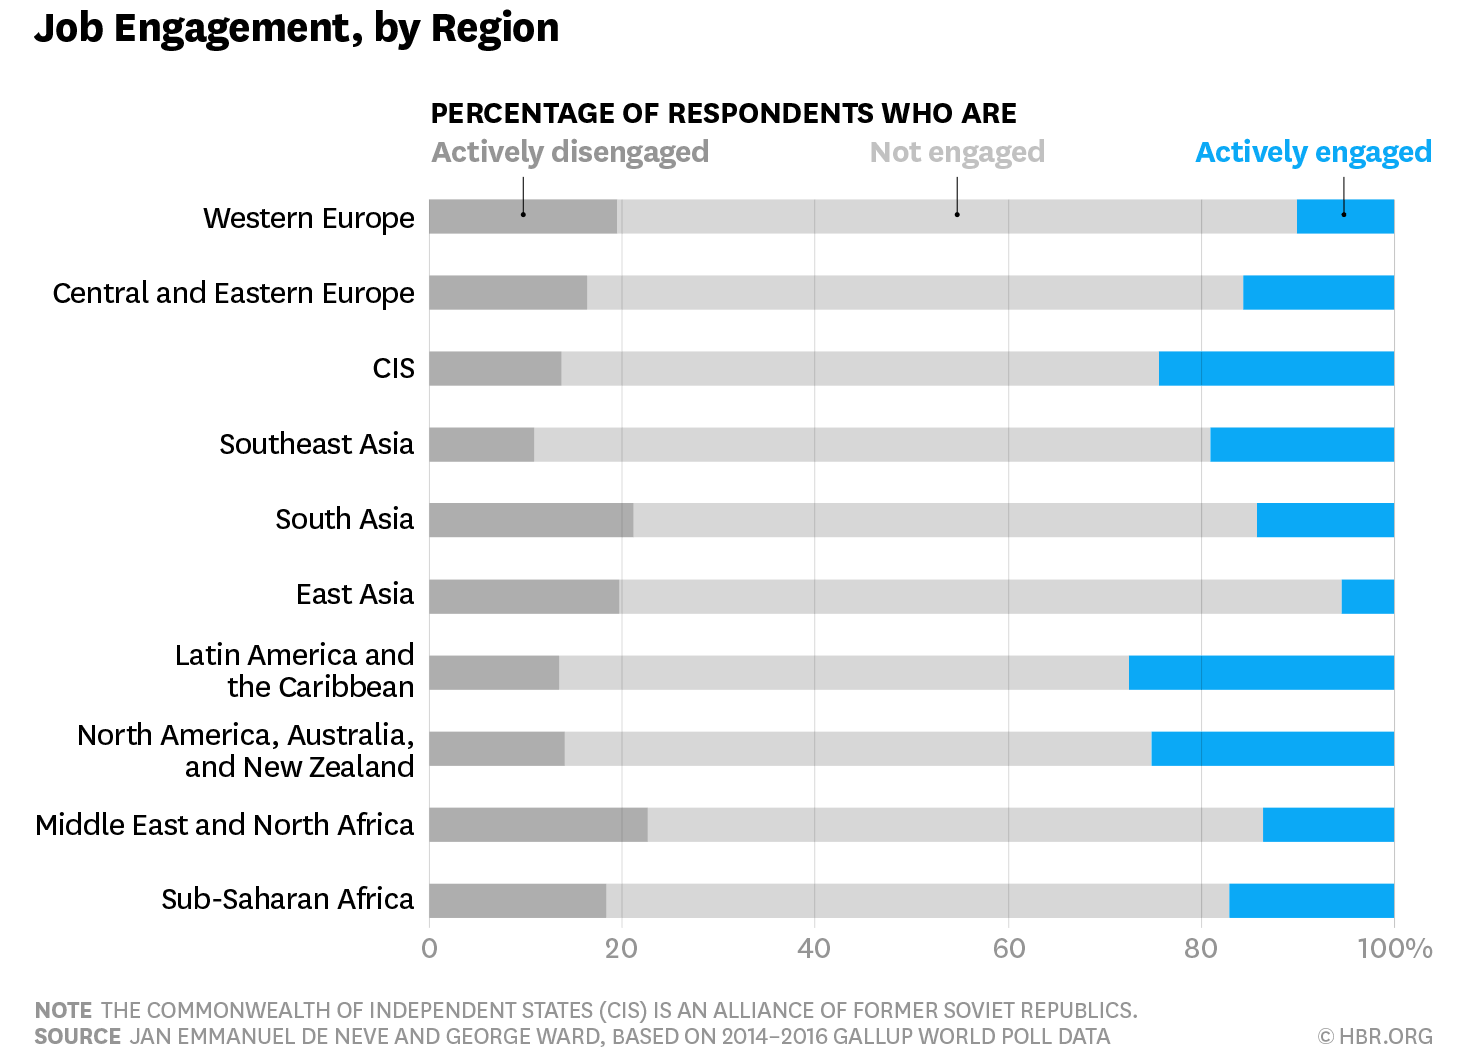 Graphic Showing Job Engagement By Region - Data From Gallup, Graphic From HBR